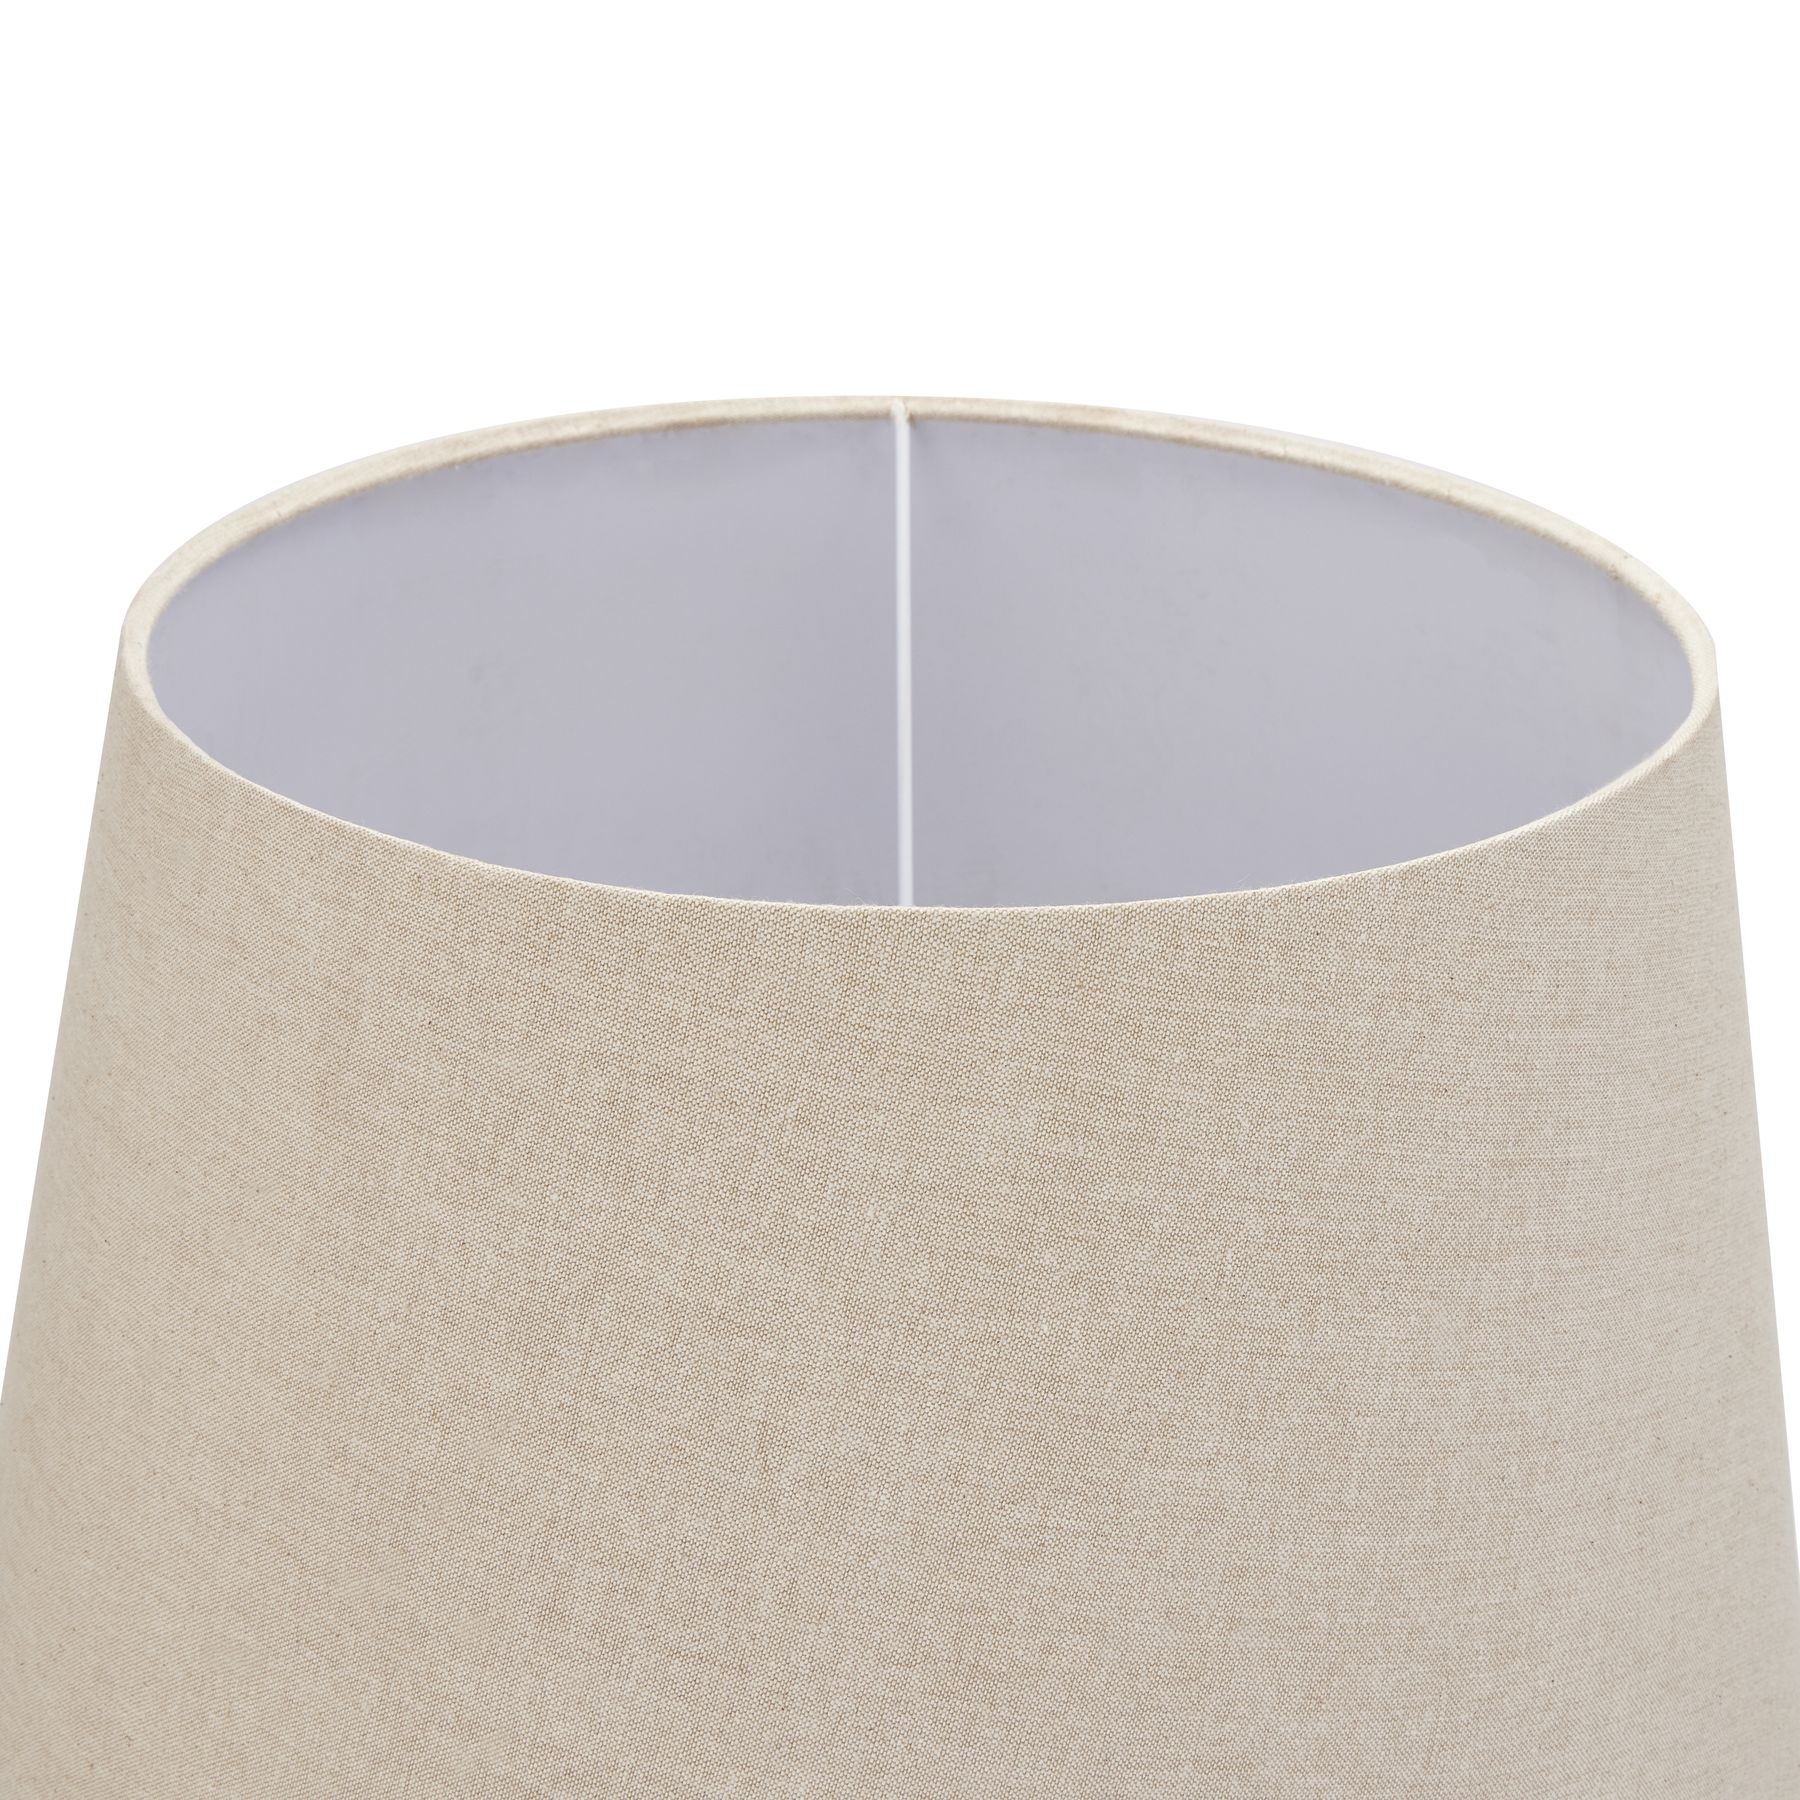 Delaney Collection Grey Urn Lamp With Linen Shade - Image 3